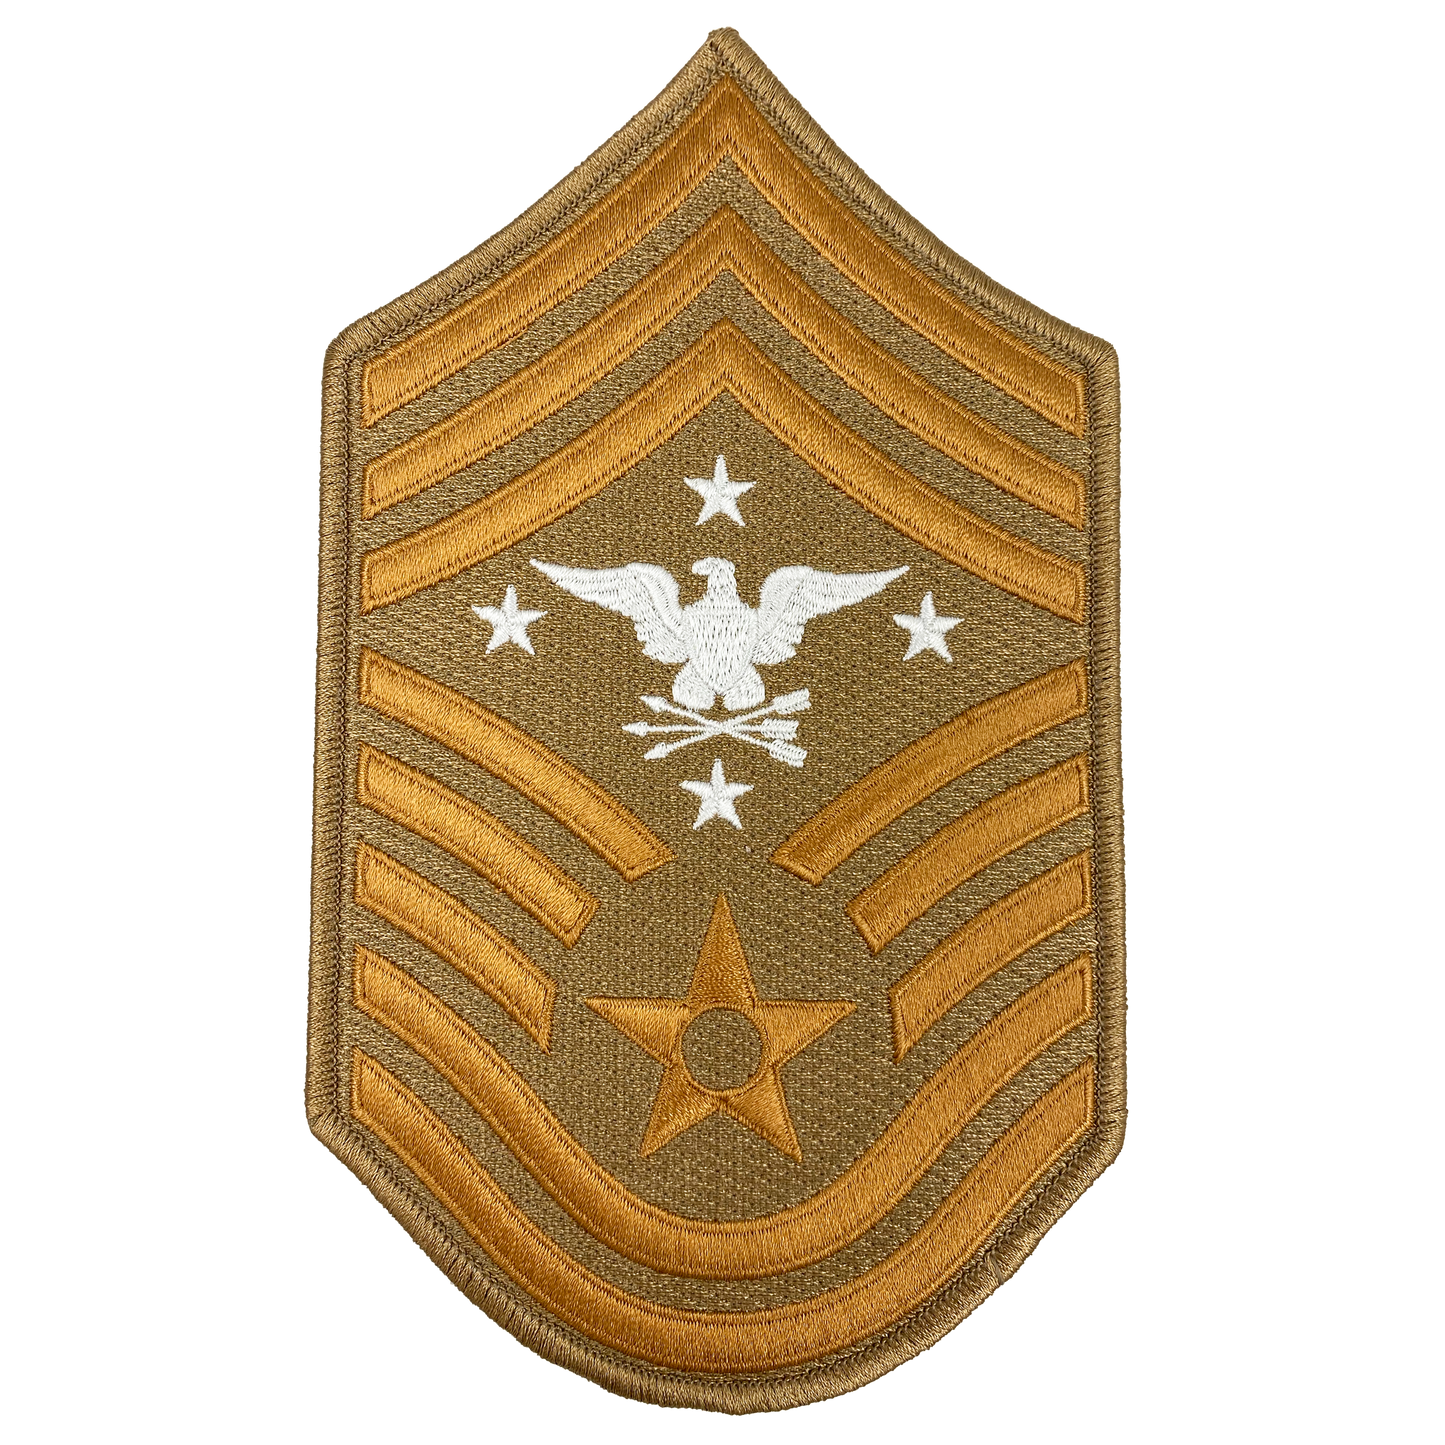 DL3-10 Senior Enlisted Advisor to the Chairman of the Joint Chiefs of Staff Air Force Senior Enlisted Advisor Chief Master Sergeant Desert Camo Rank (Left facing Eagle) USAF Patch 